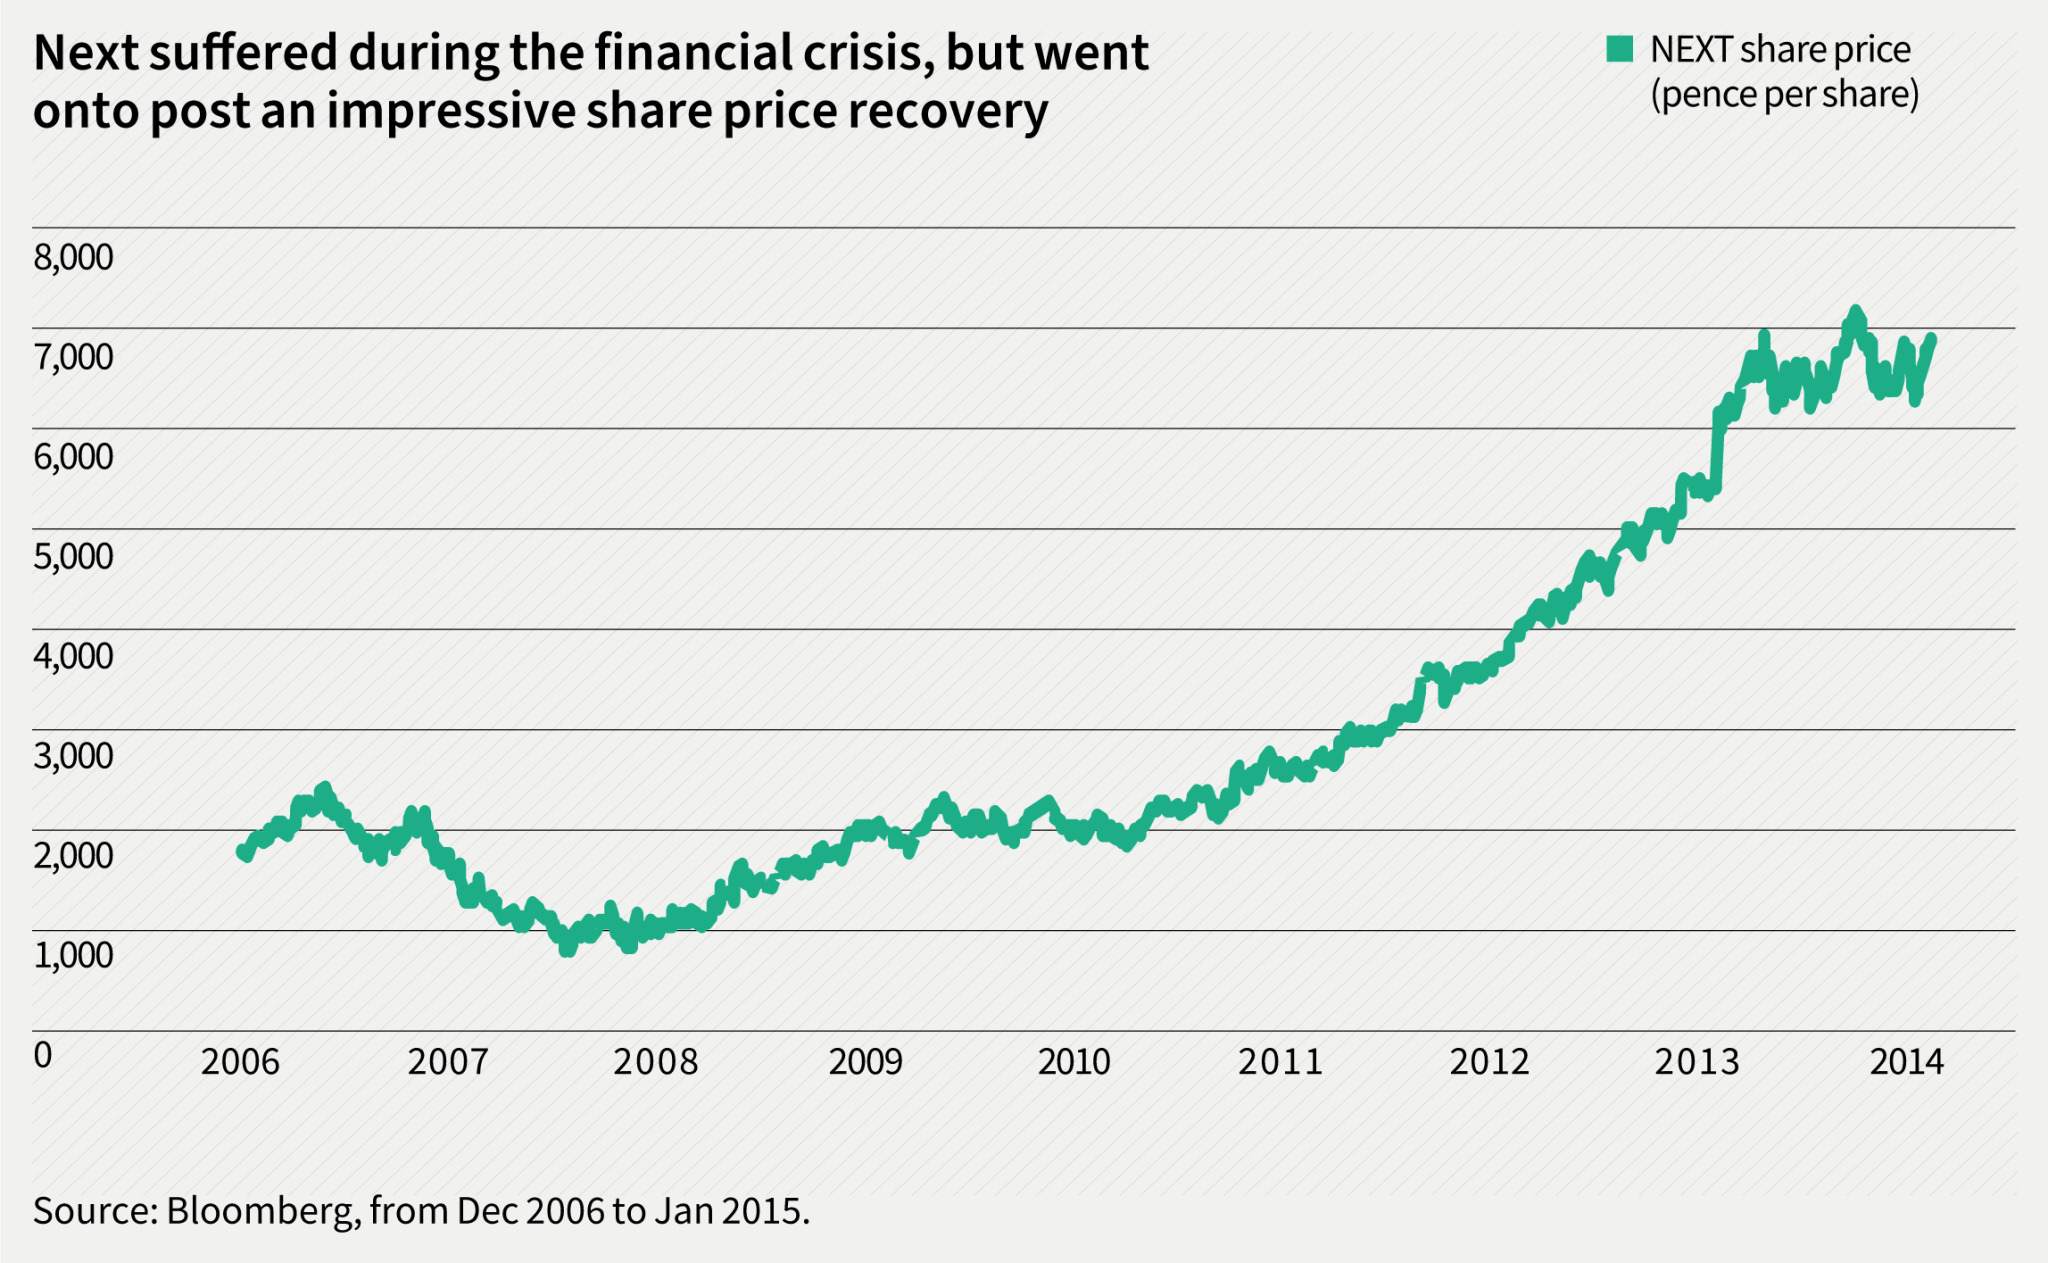 Next suffered during the financial crisis, but had a good share price recovery